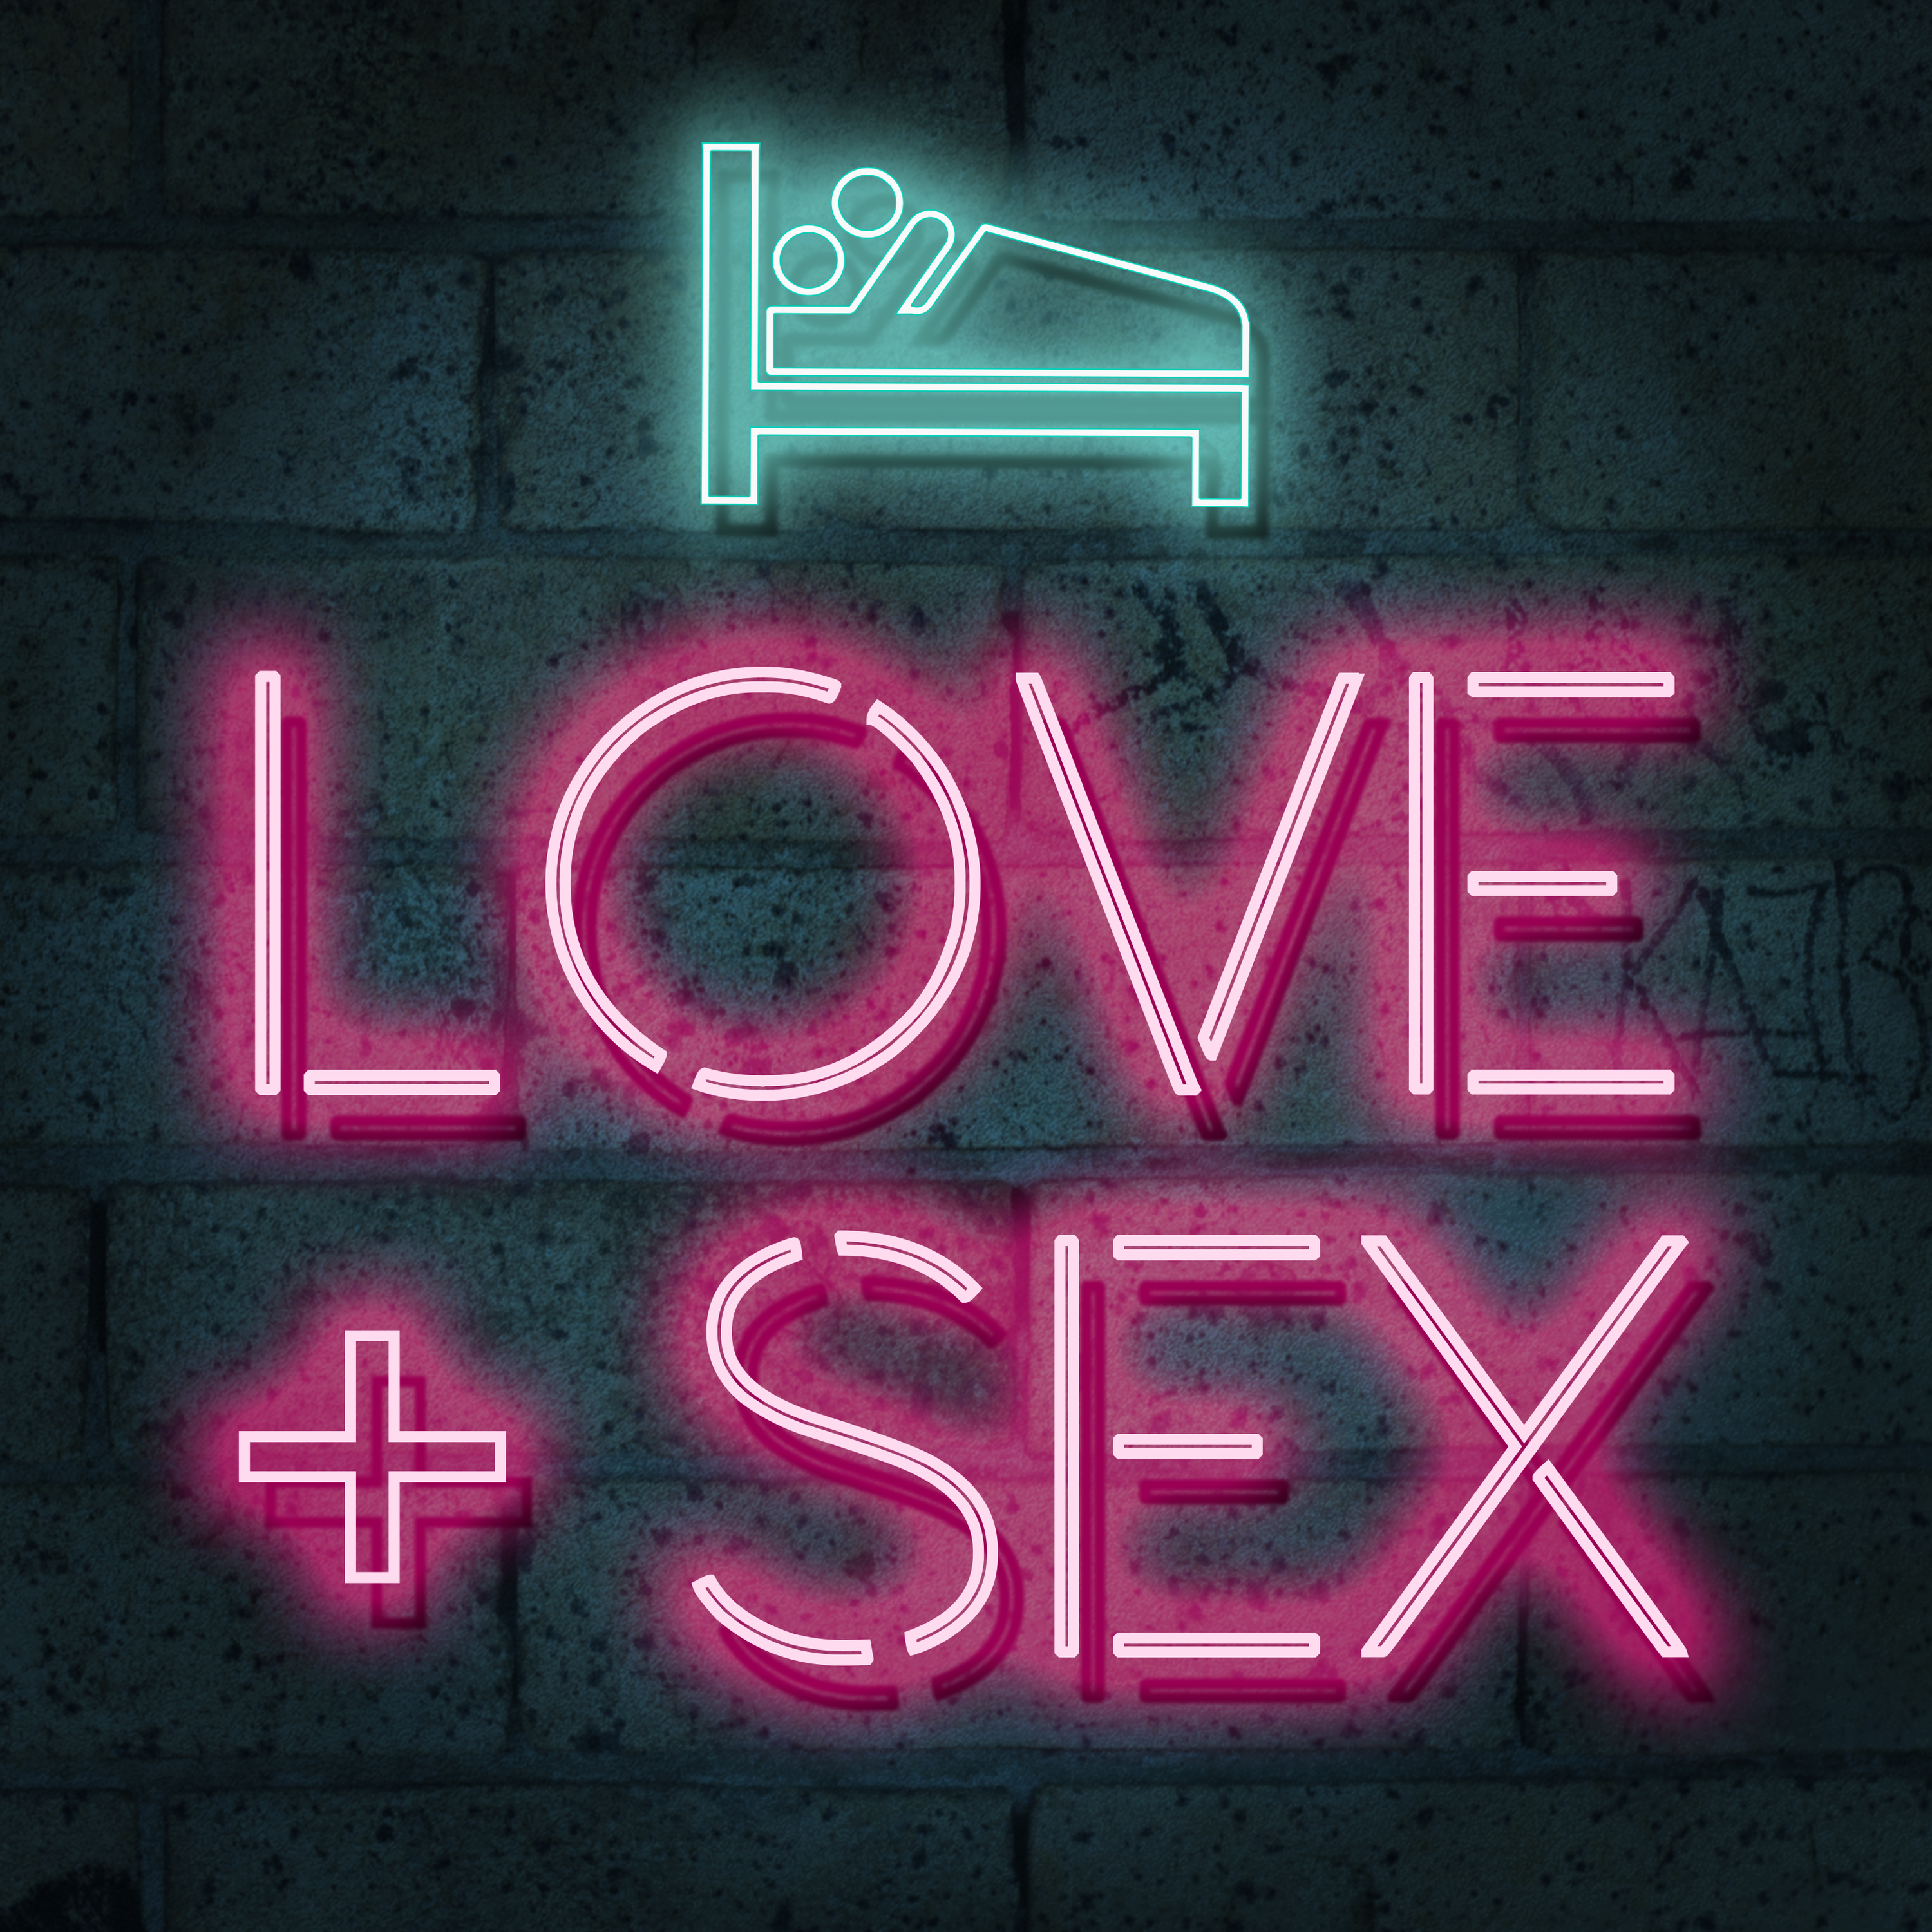 More Of Your Most Pressing Sex Questions, Answered